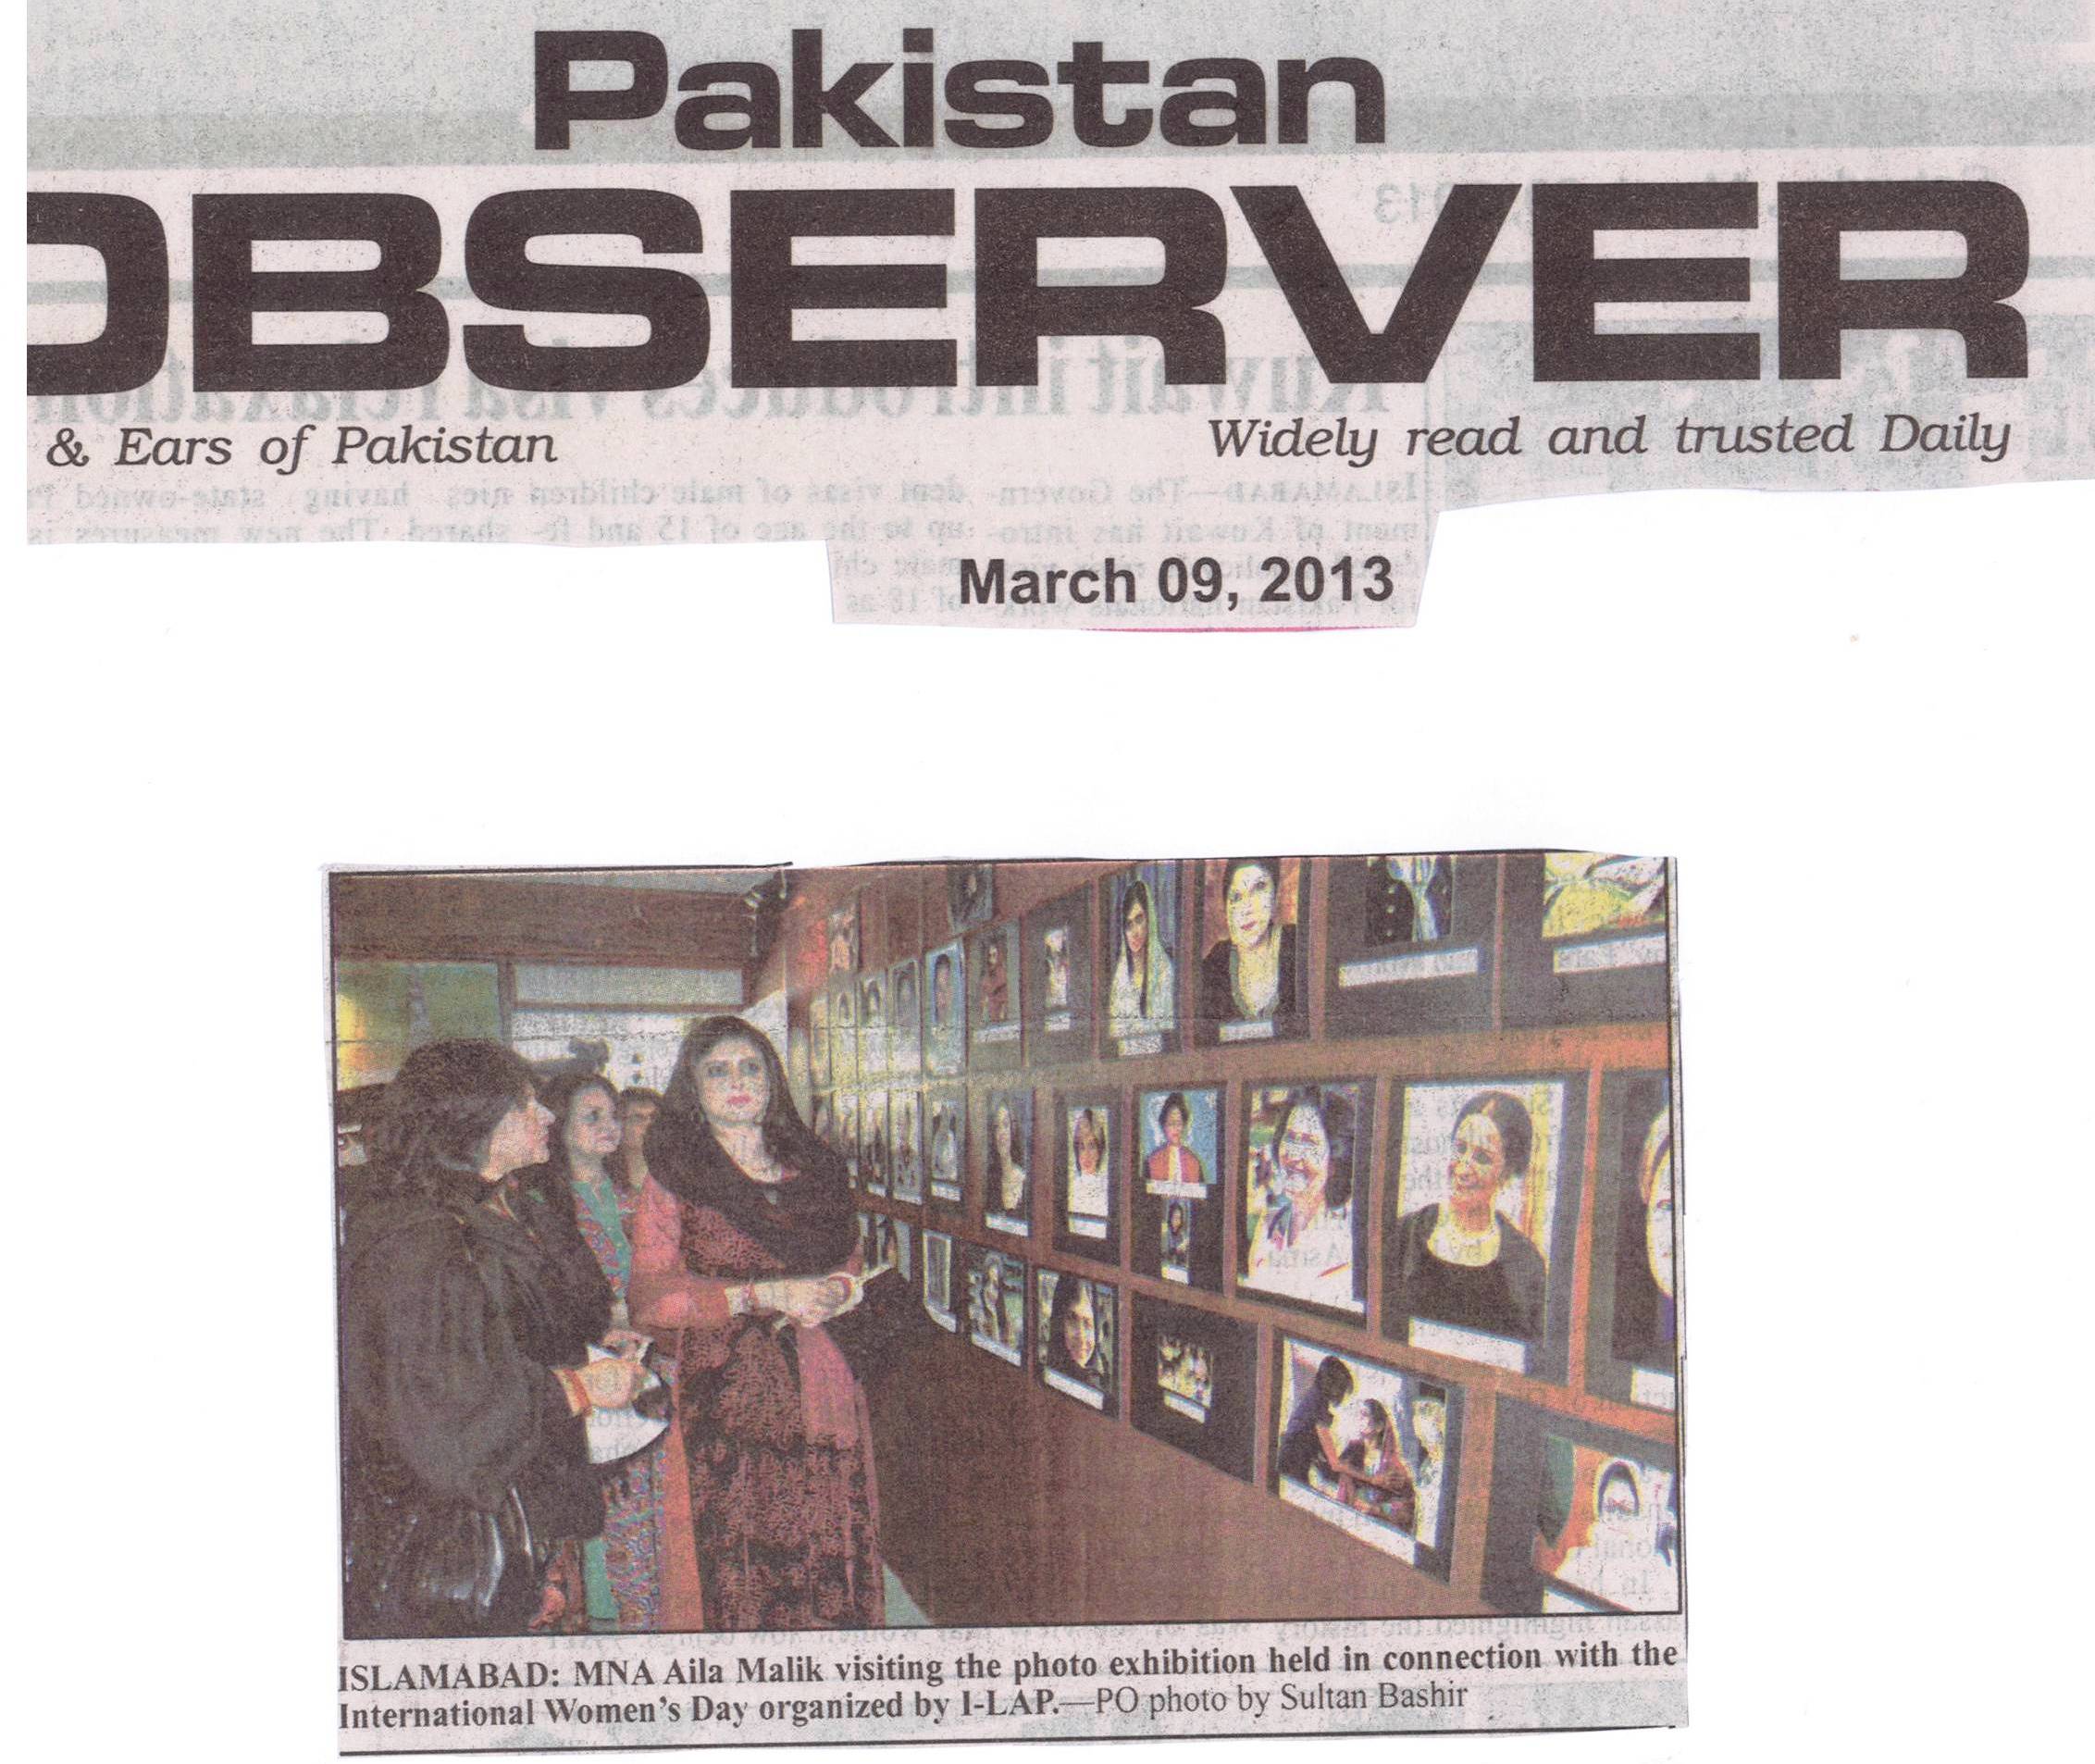 ISLAMABAD: MNA Aila Malik visiting the photo exhibition held in connection with the international Women's Day organized by I-LAP